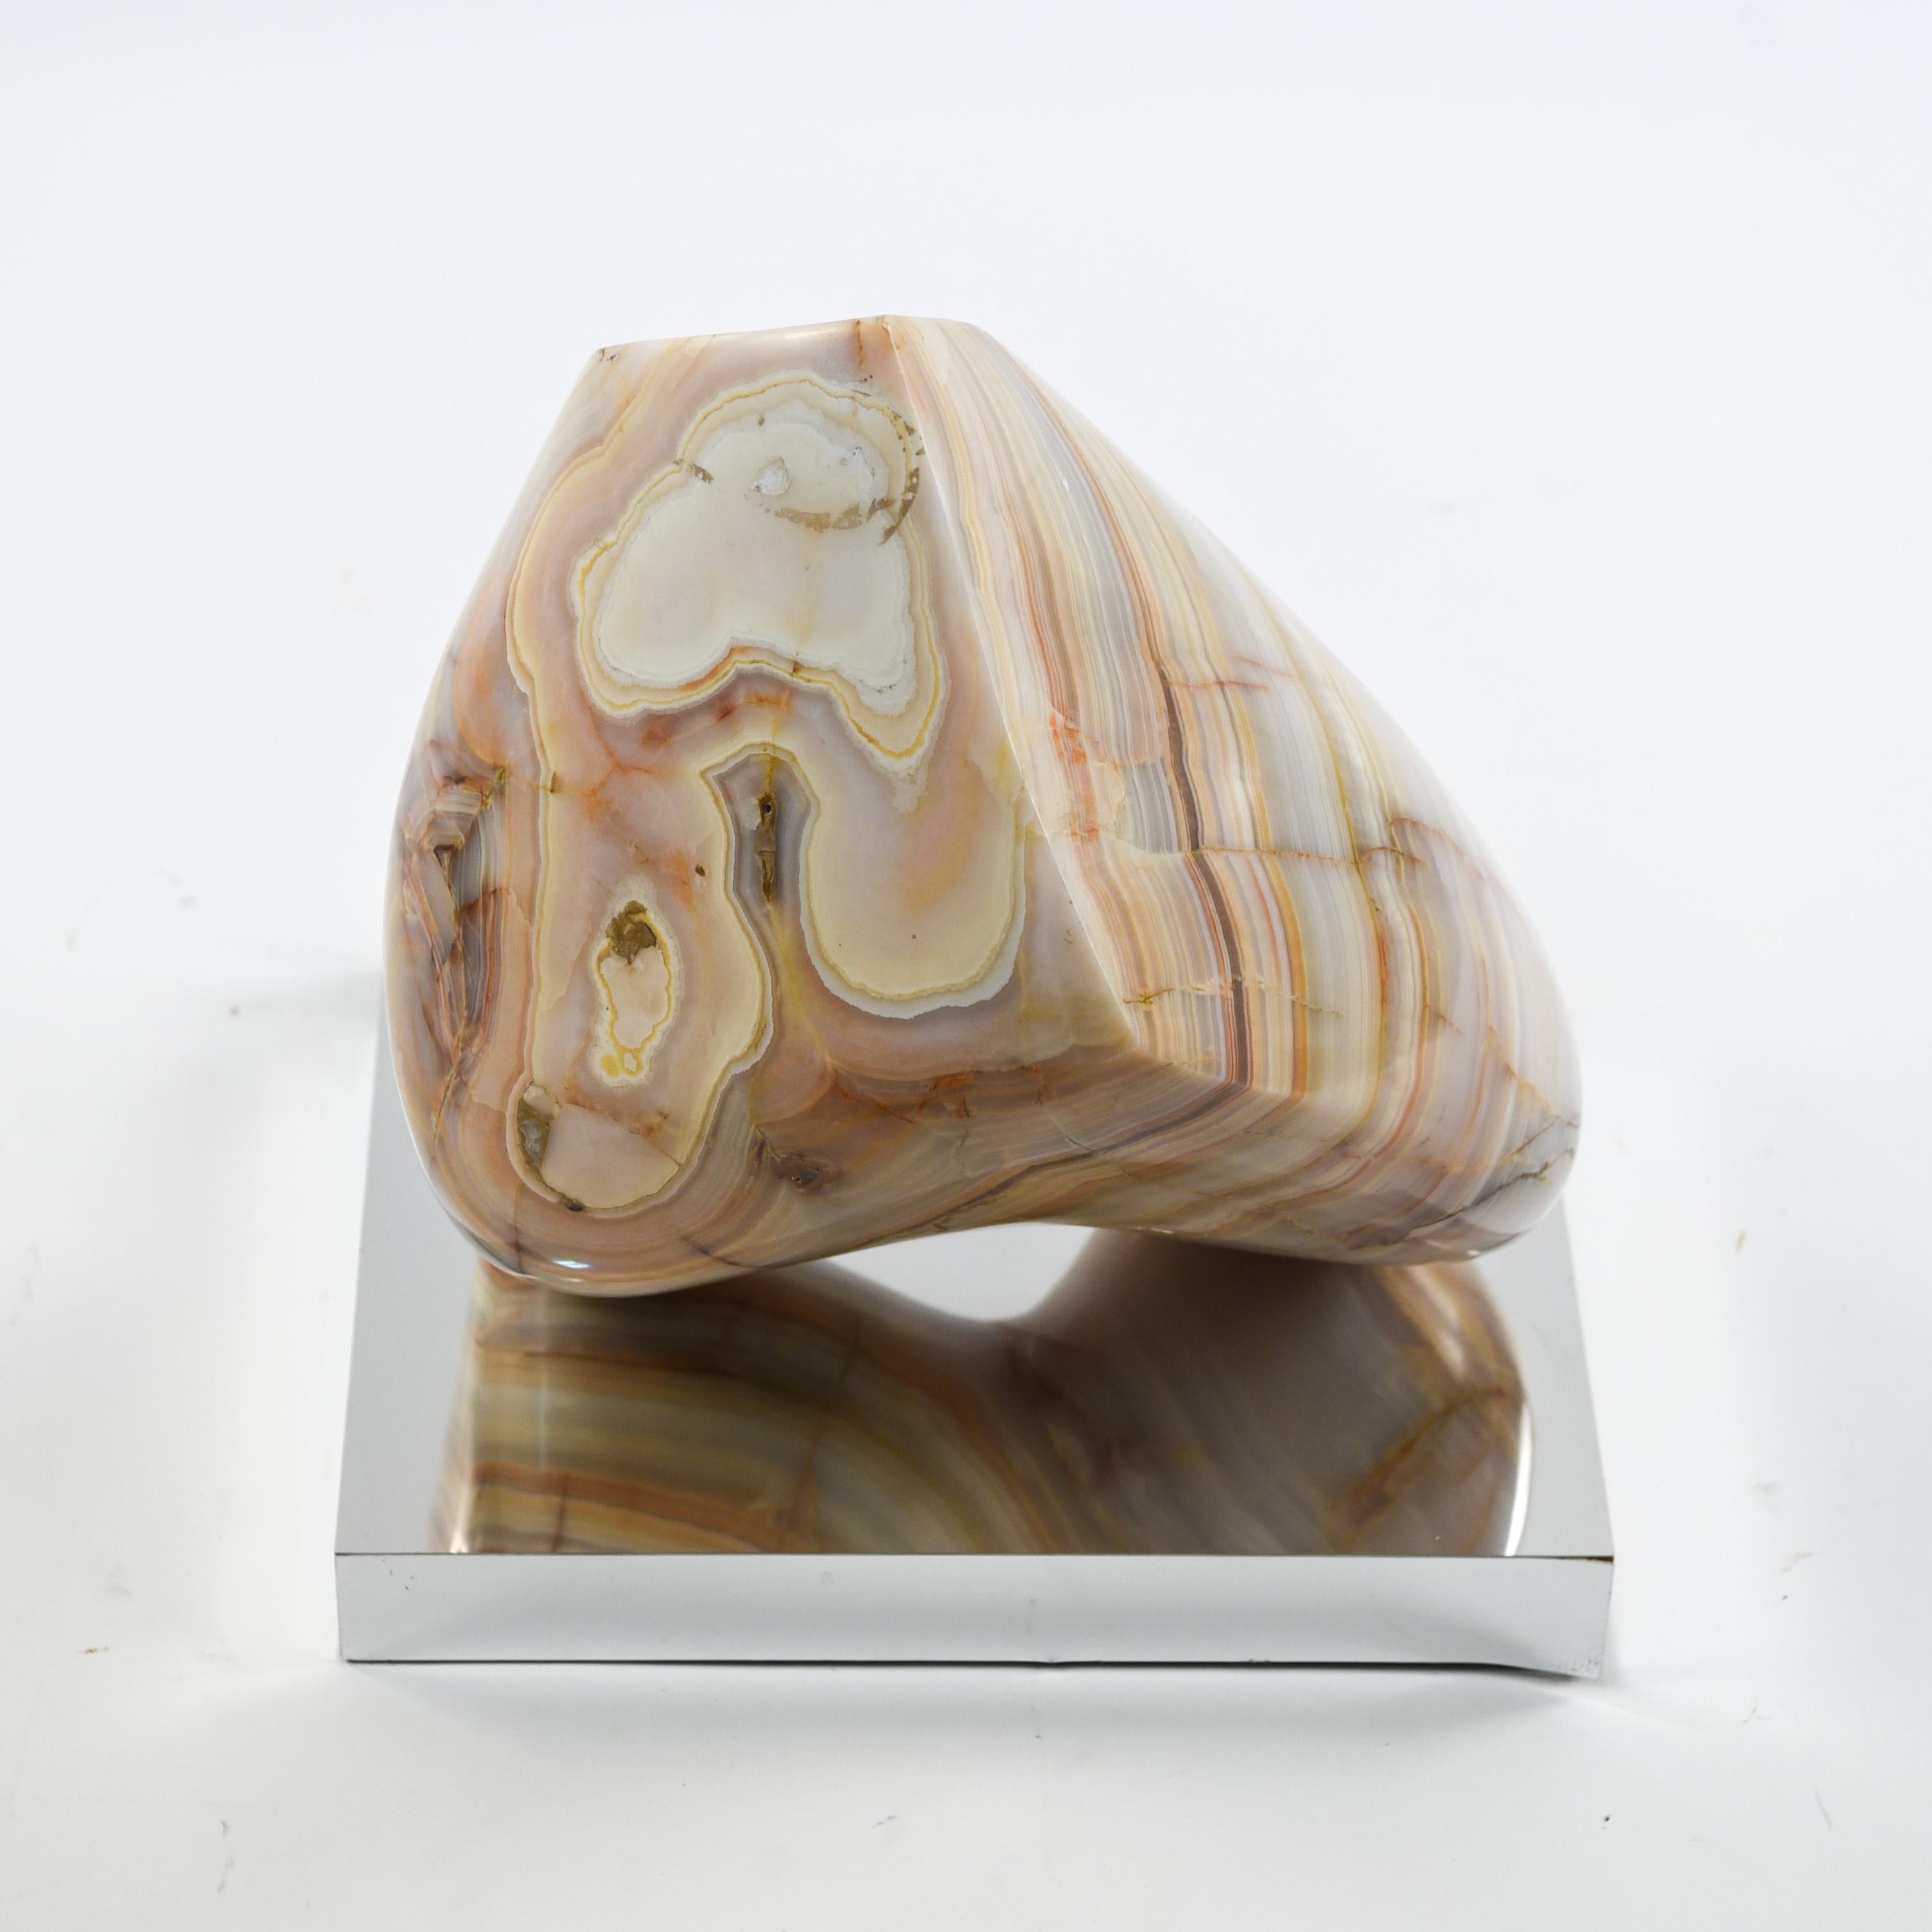 This beautiful marble sculpture has a fresh, modern appearance. Resembling an abstract lower torso, this piece is full of sleek, smooth lines both in the design of the piece and within the marble itself.